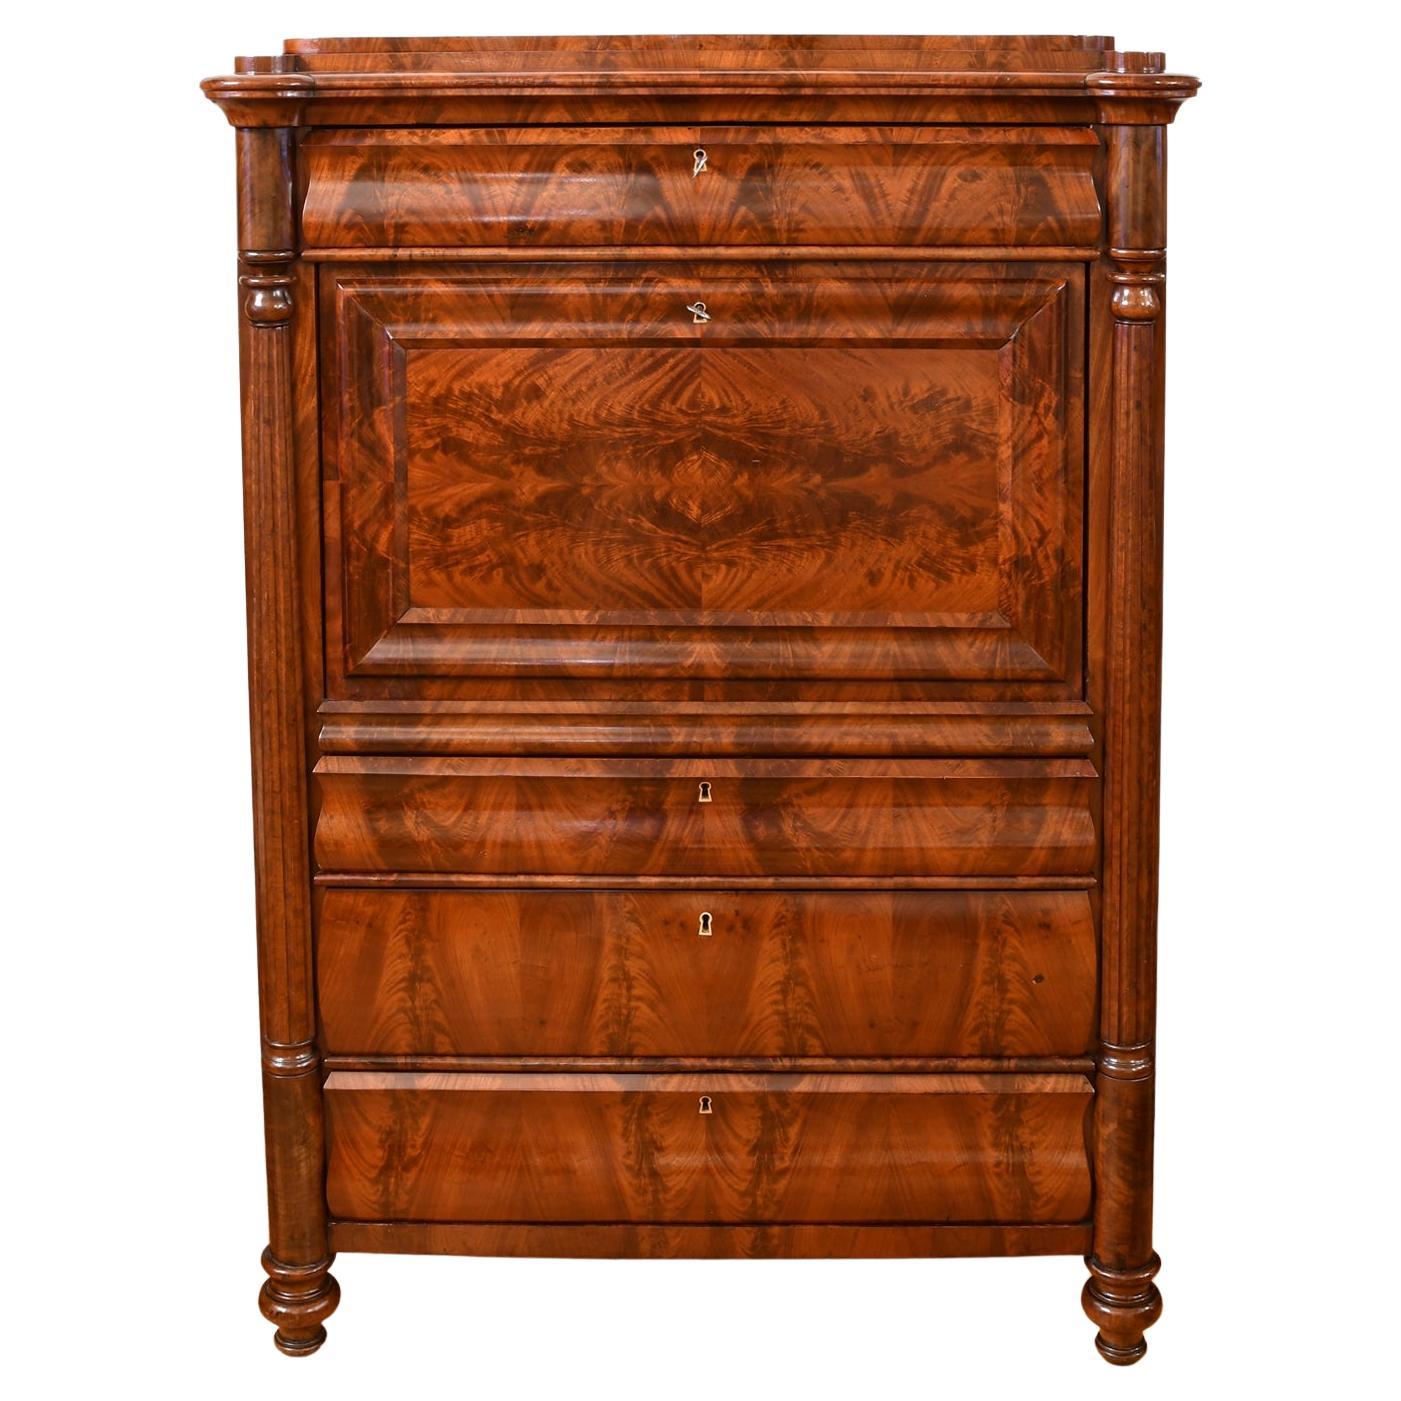 Antique Chest with Fall-Front Secretary Desk in West Indies Mahogany, Denmark